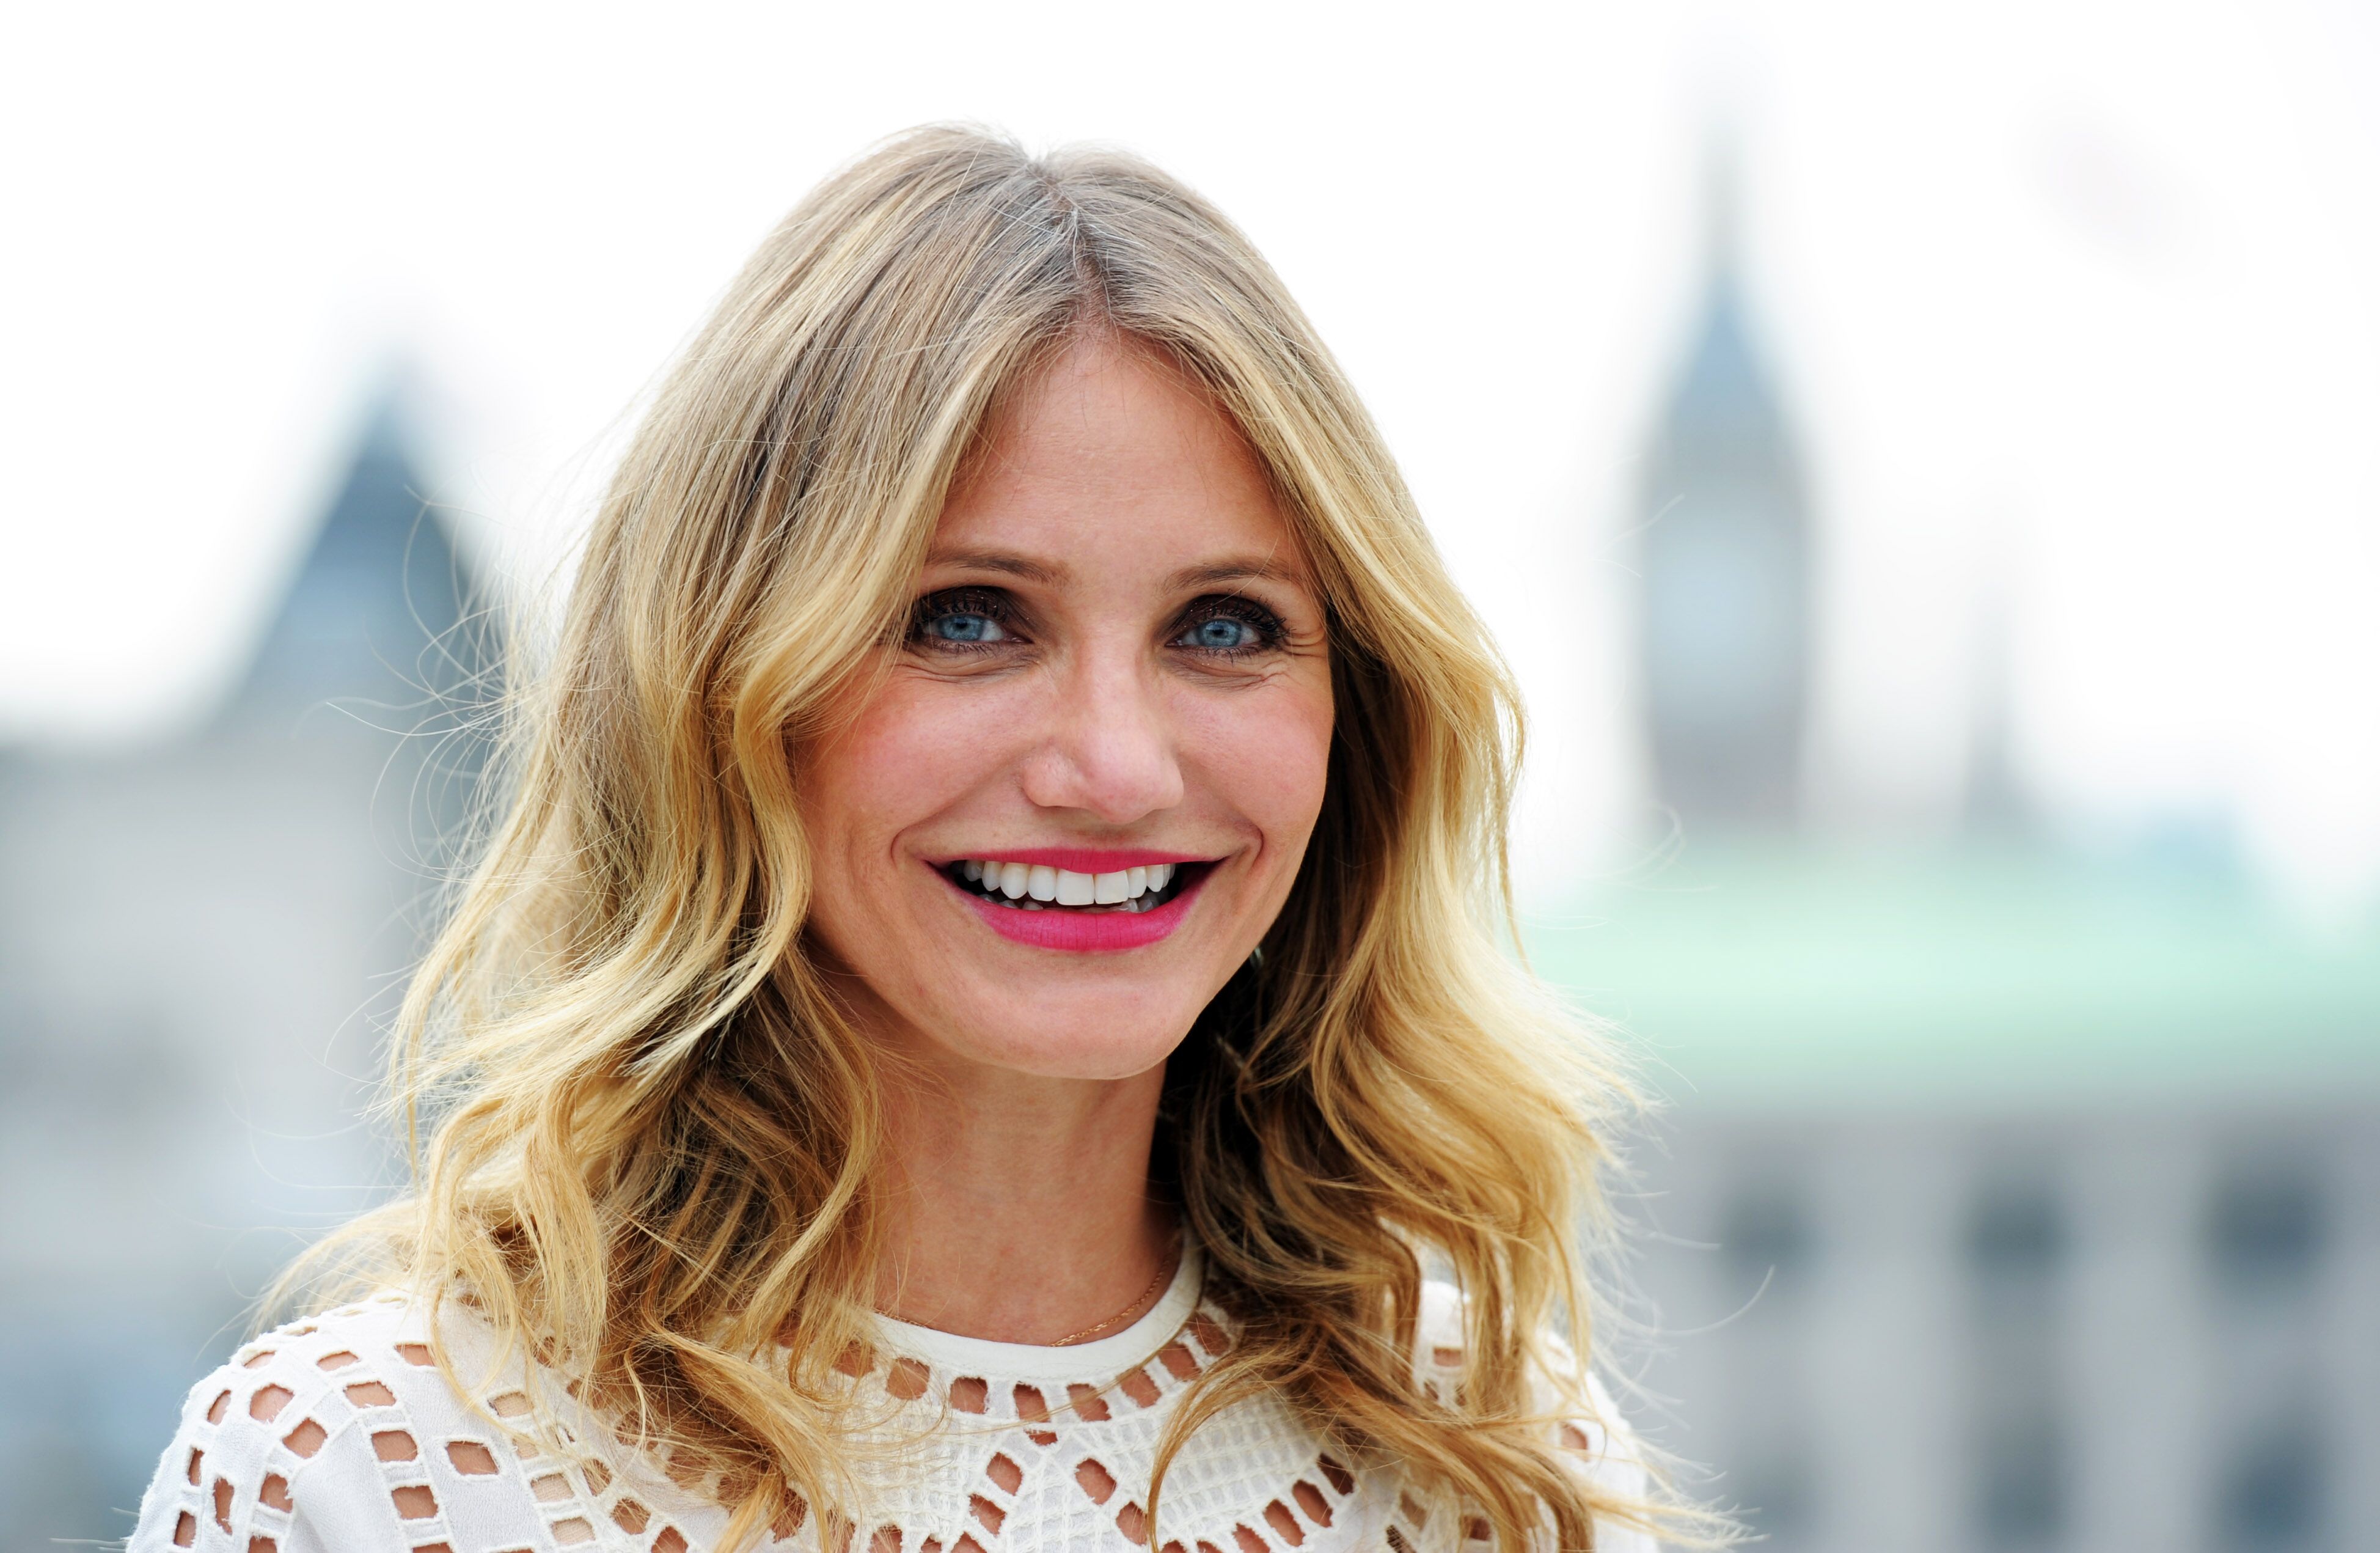  Cameron Diaz at a photo shoot for "Sex Tape" in London in 2014 | Source: Getty Images